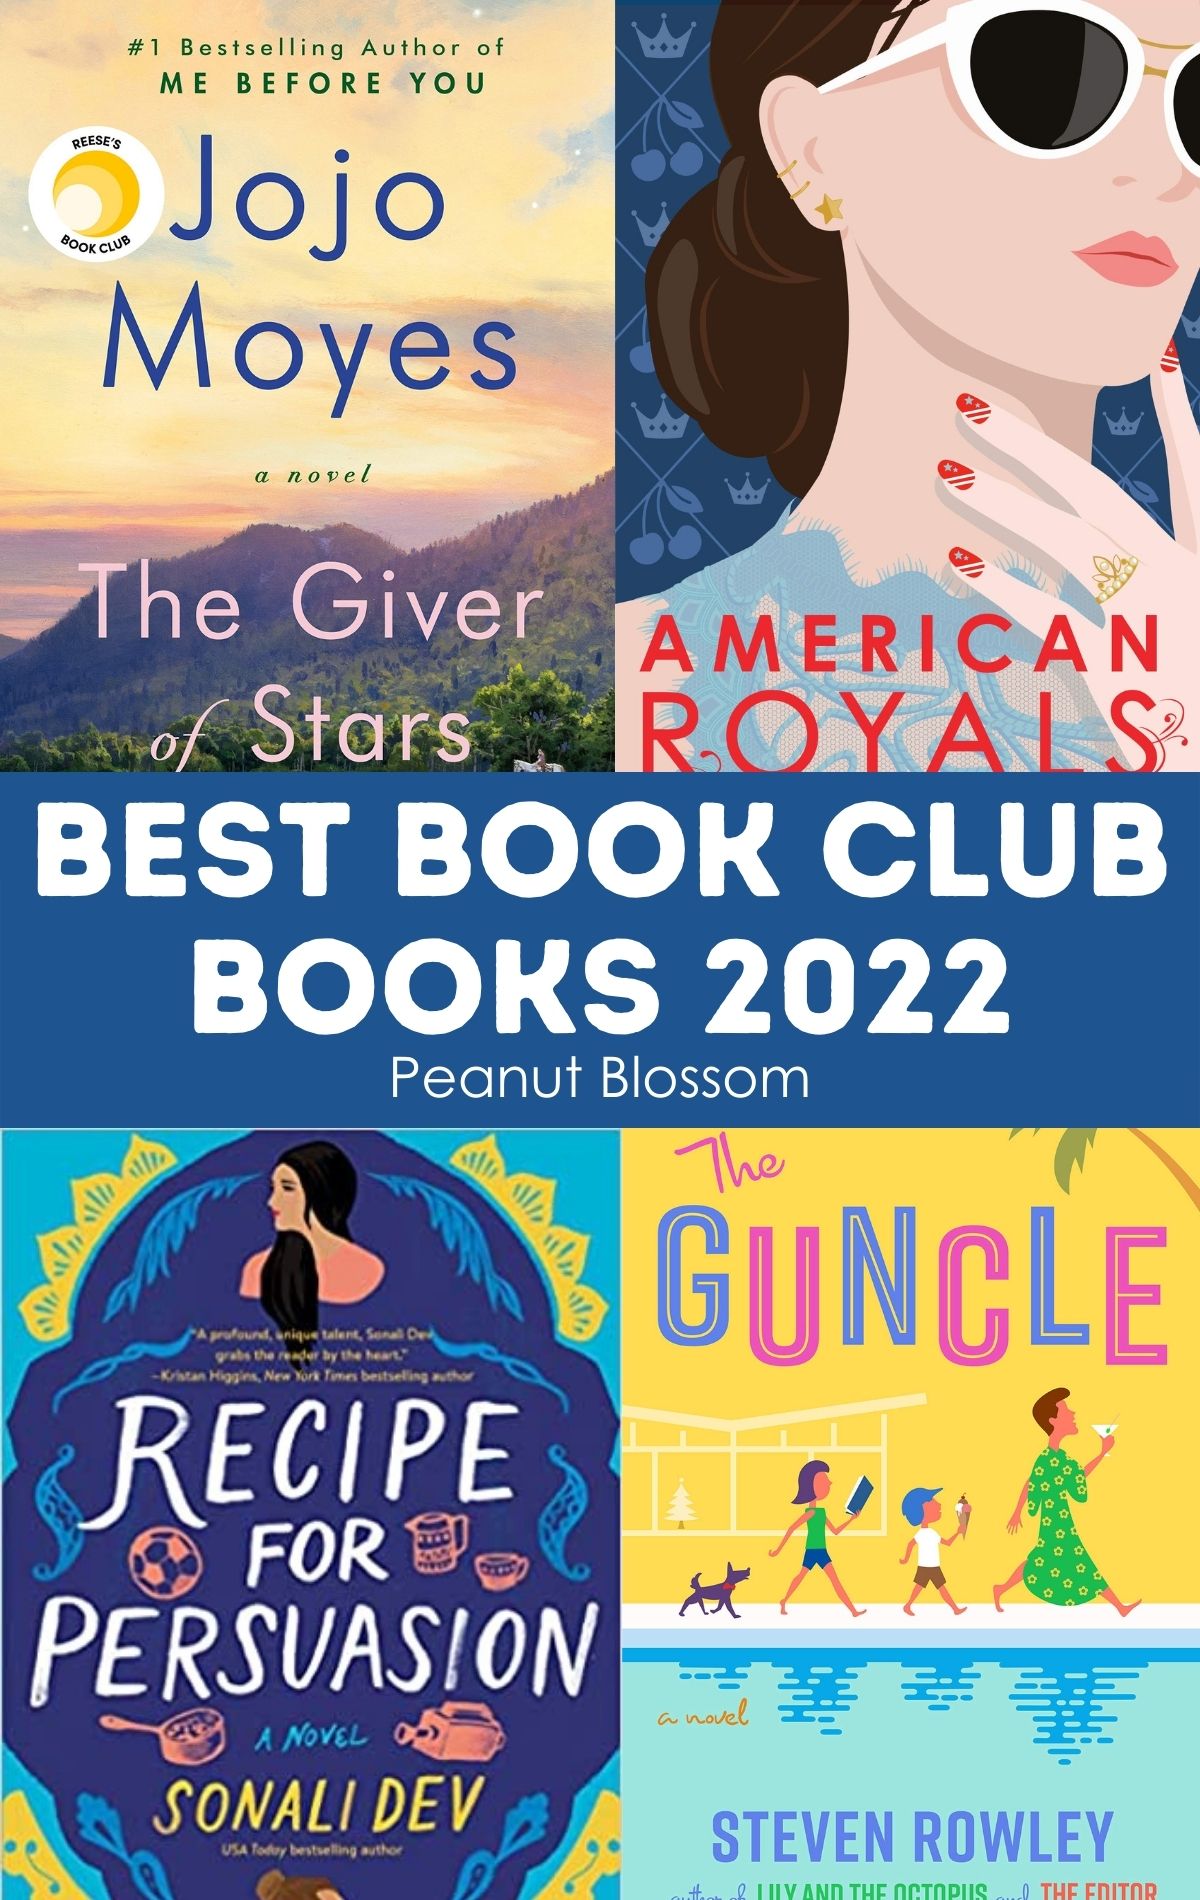 A photo collage shows 4 popular book club books for 2022